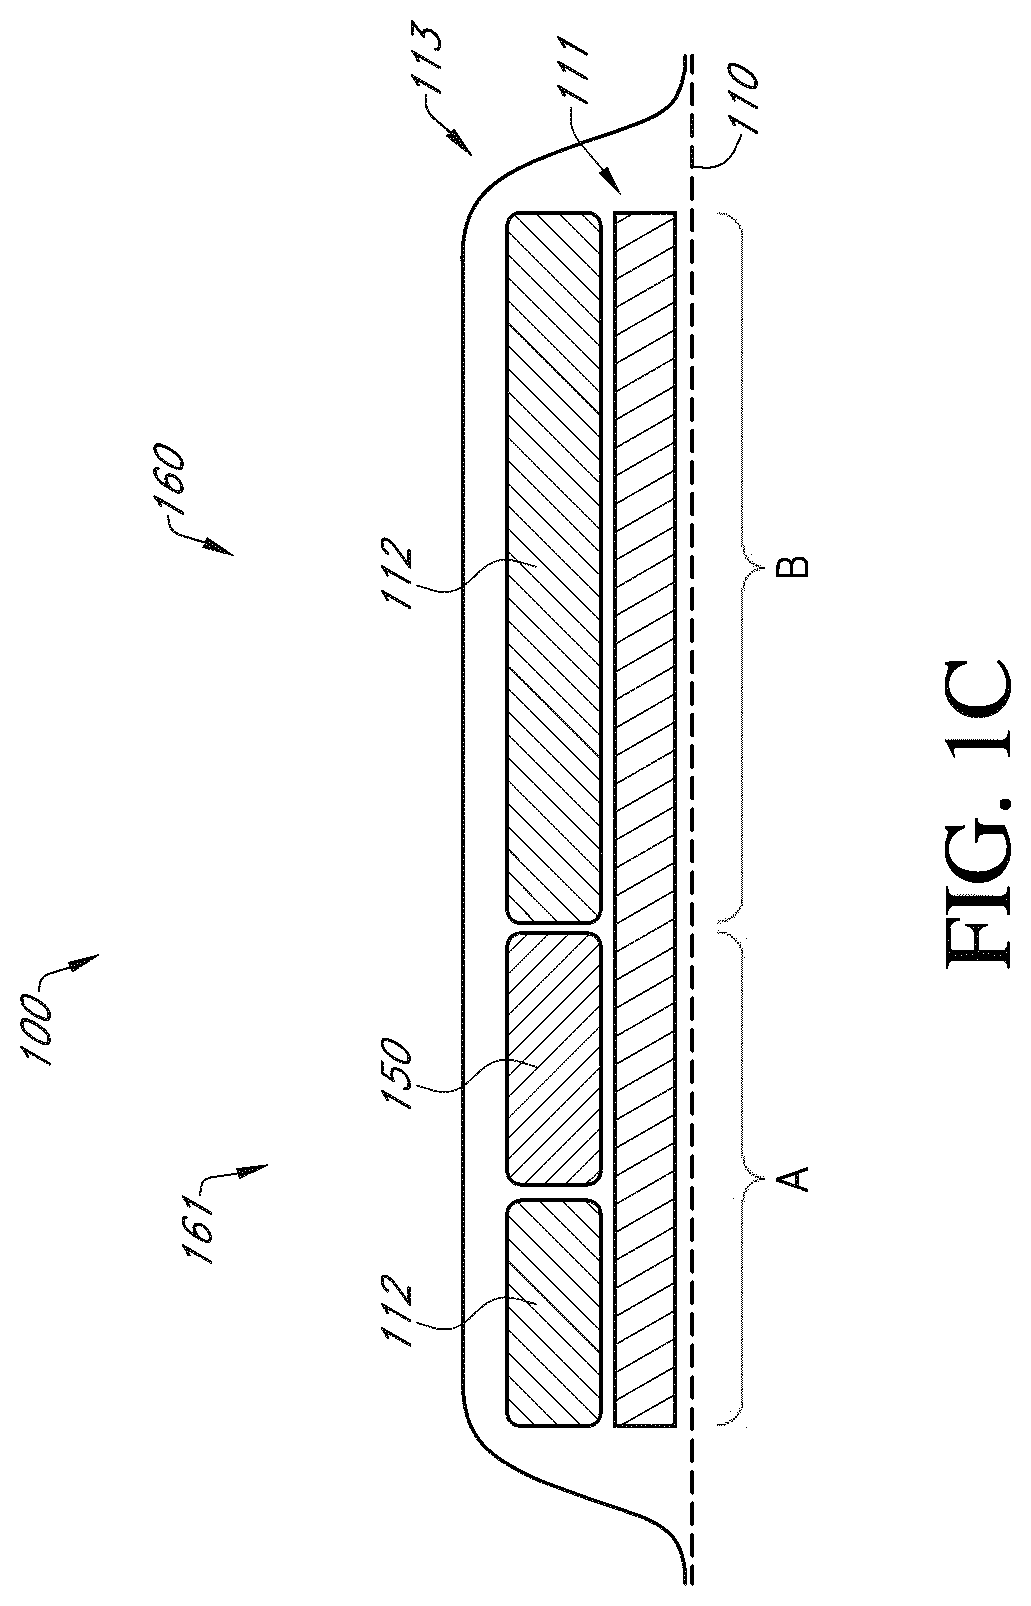 Negative pressure wound treatment apparatuses and methods with integrated electronics